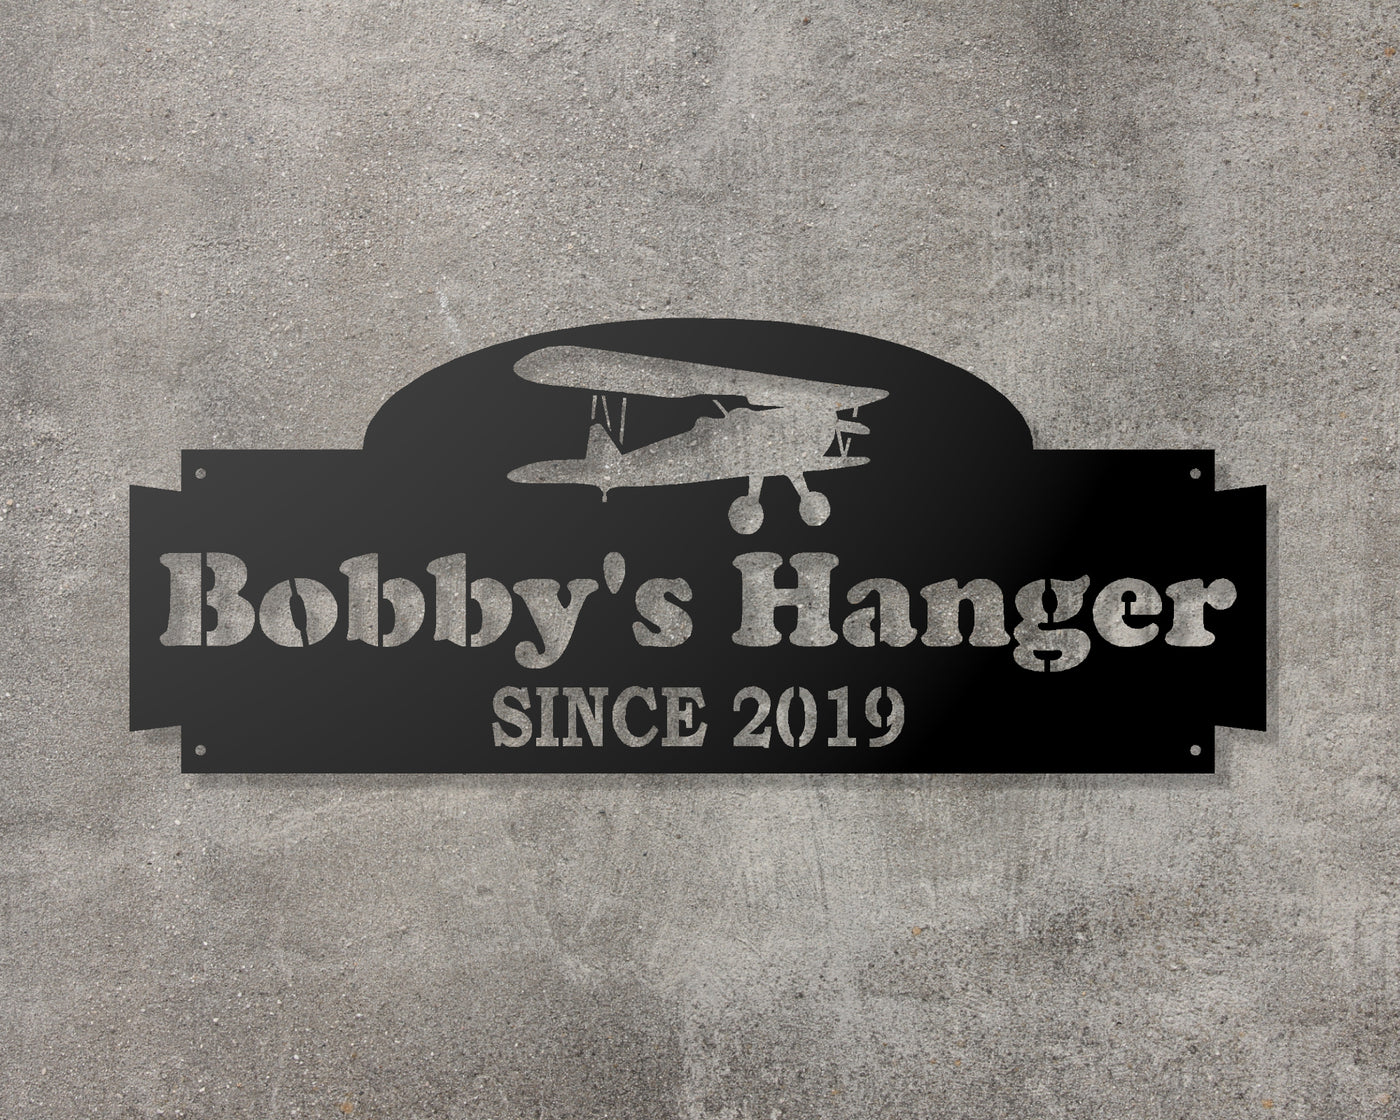 Personalized Airplane Hanger Metal Sign - Madison Iron and Wood - Personalized sign - metal outdoor decor - Steel deocrations - american made products - veteran owned business products - fencing decorations - fencing supplies - custom wall decorations - personalized wall signs - steel - decorative post caps - steel post caps - metal post caps - brackets - structural brackets - home improvement - easter - easter decorations - easter gift - easter yard decor